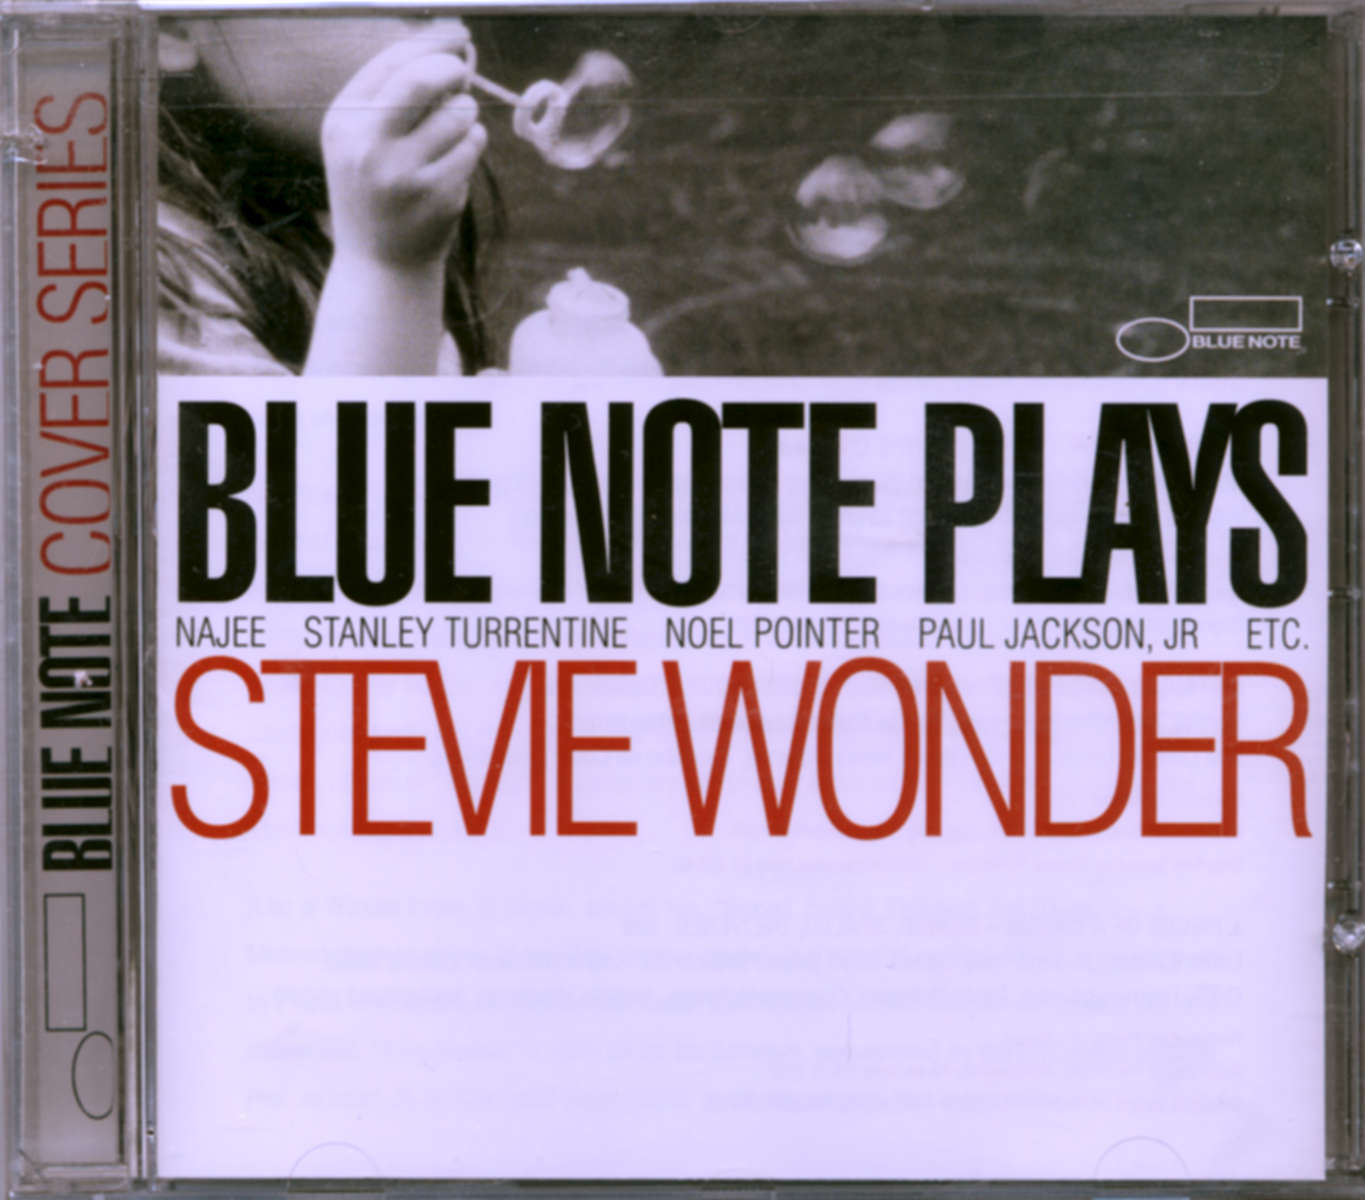 CD cover photo by Anne Turyn2004Blue Note Records, New York, NY